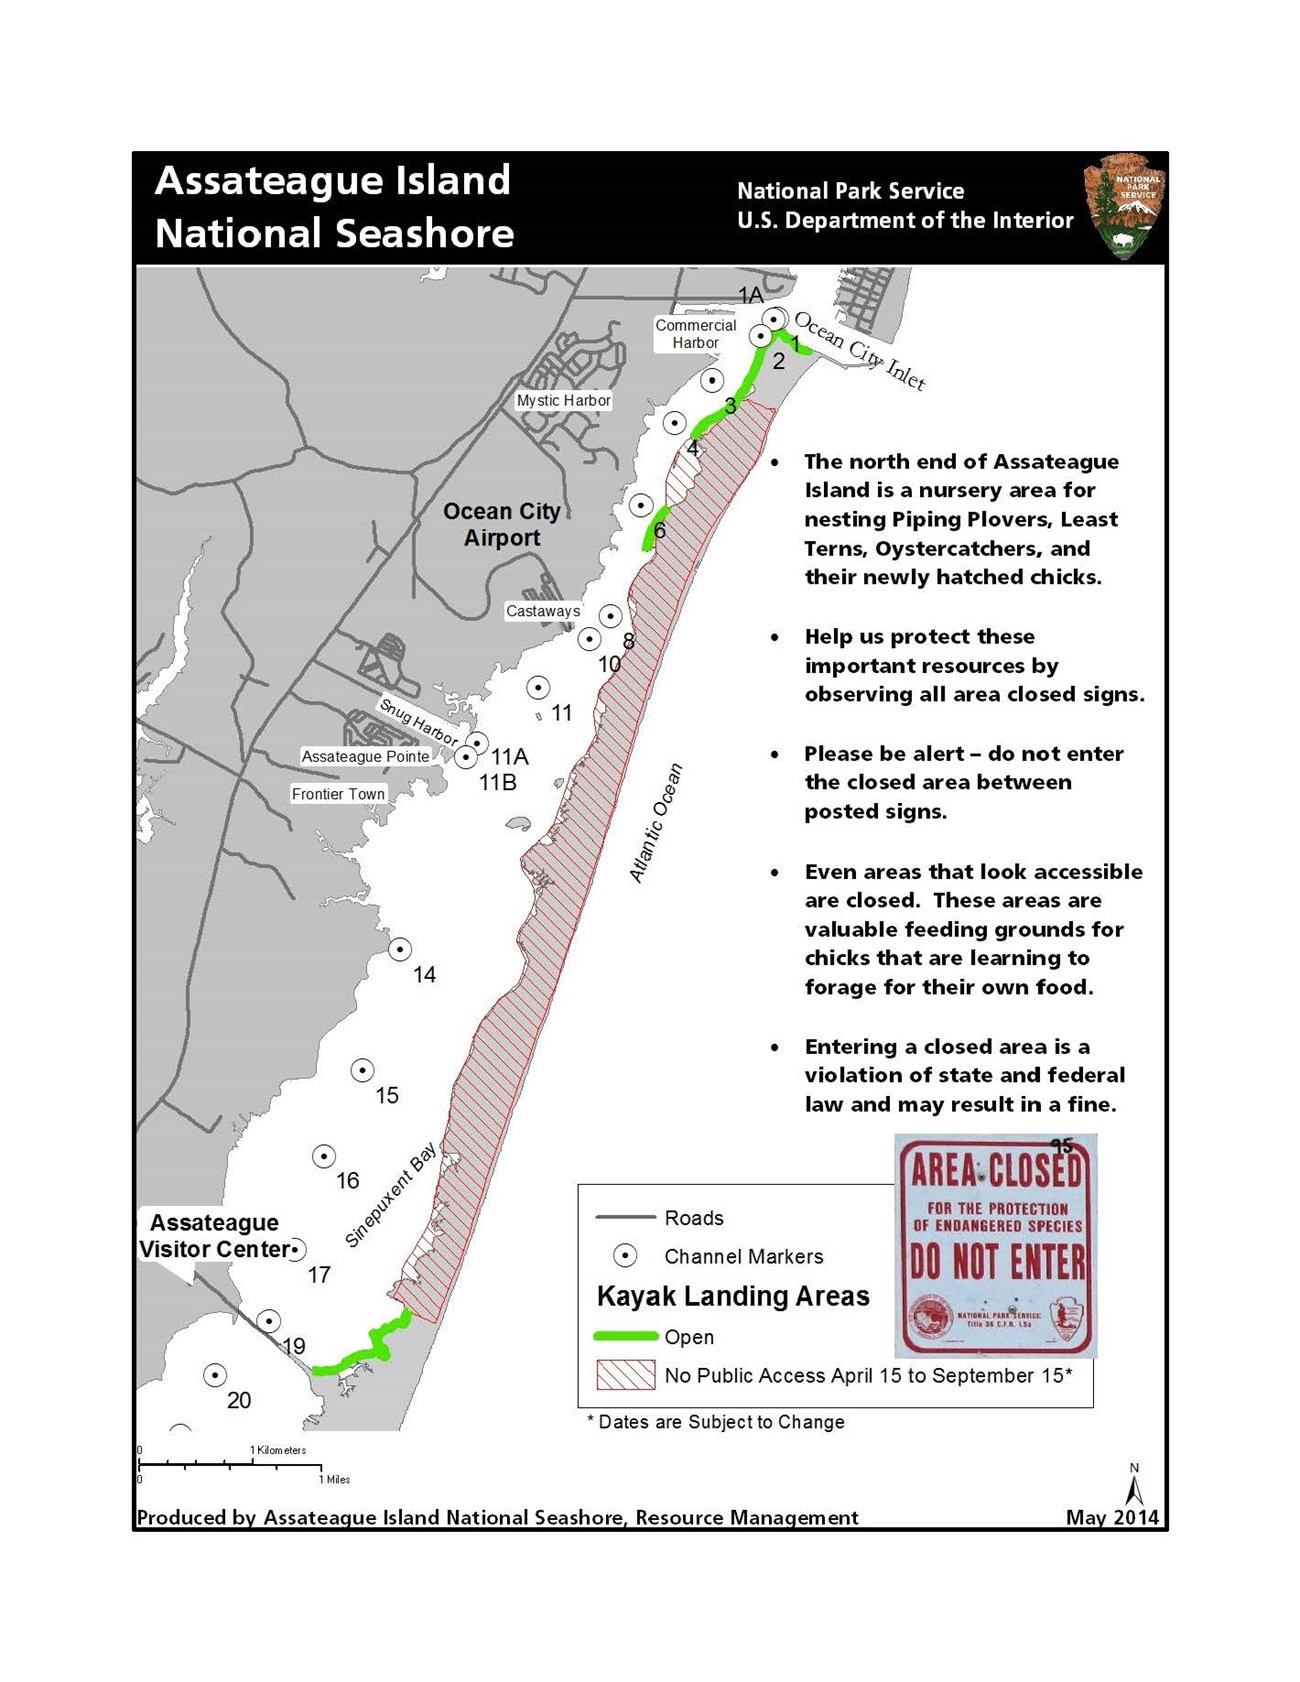 Map showing bayside kayak landing areas north of the Verrazano bridge in the Maryland district of Assateague Island National Seashore